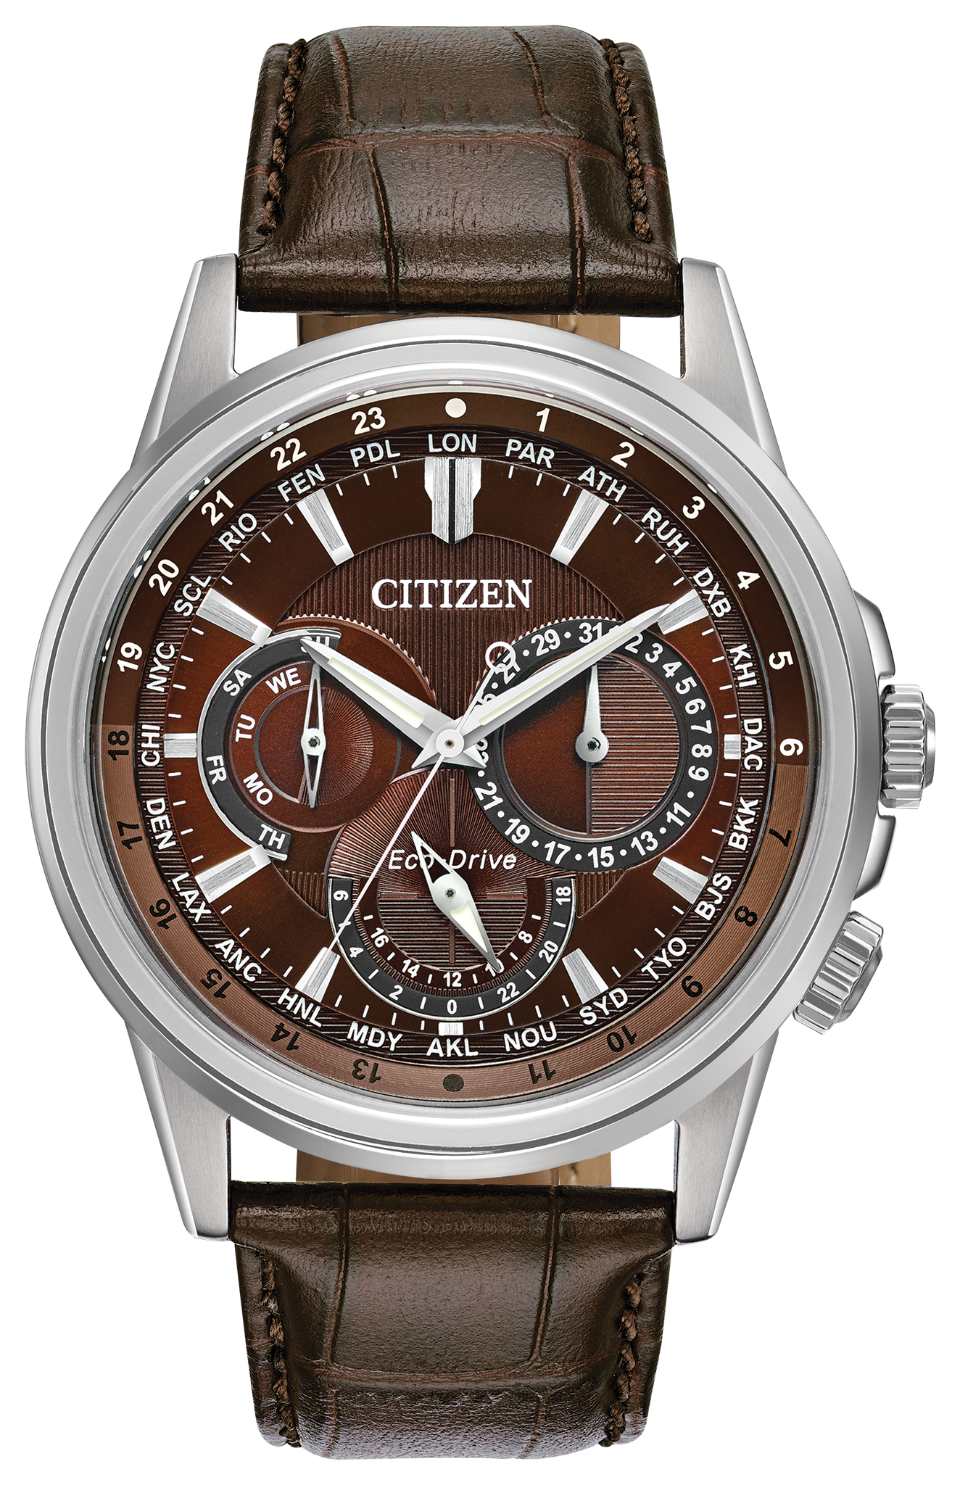 Bring sophistication to your day with the Citizen Calendrier, powered by any light with Eco-Drive. This timeless watch features 12/24-hour time, world time in 24 cities and day/date. Men's watch featured with stainless steel case, chocolate brown leather strap with matching brown dial. Featuring Eco-Drive technology – powered by light. The watch includes a 44mm case.